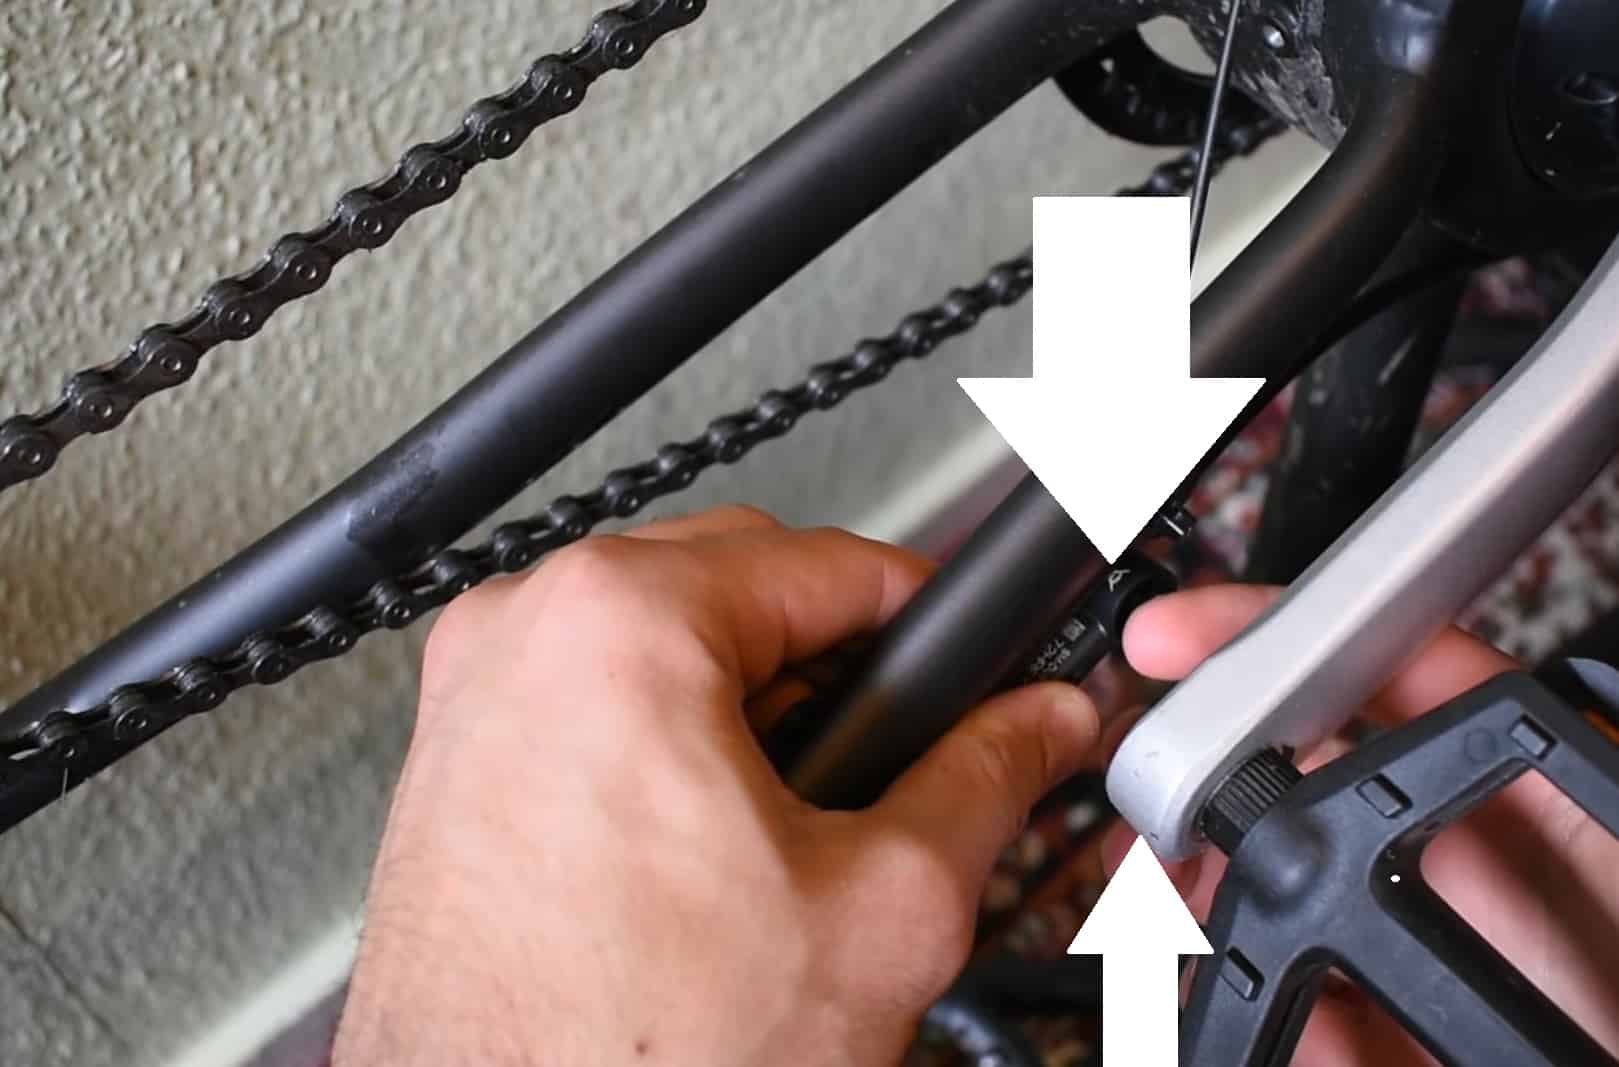 change the position of the sensor so that it is opposite the crank